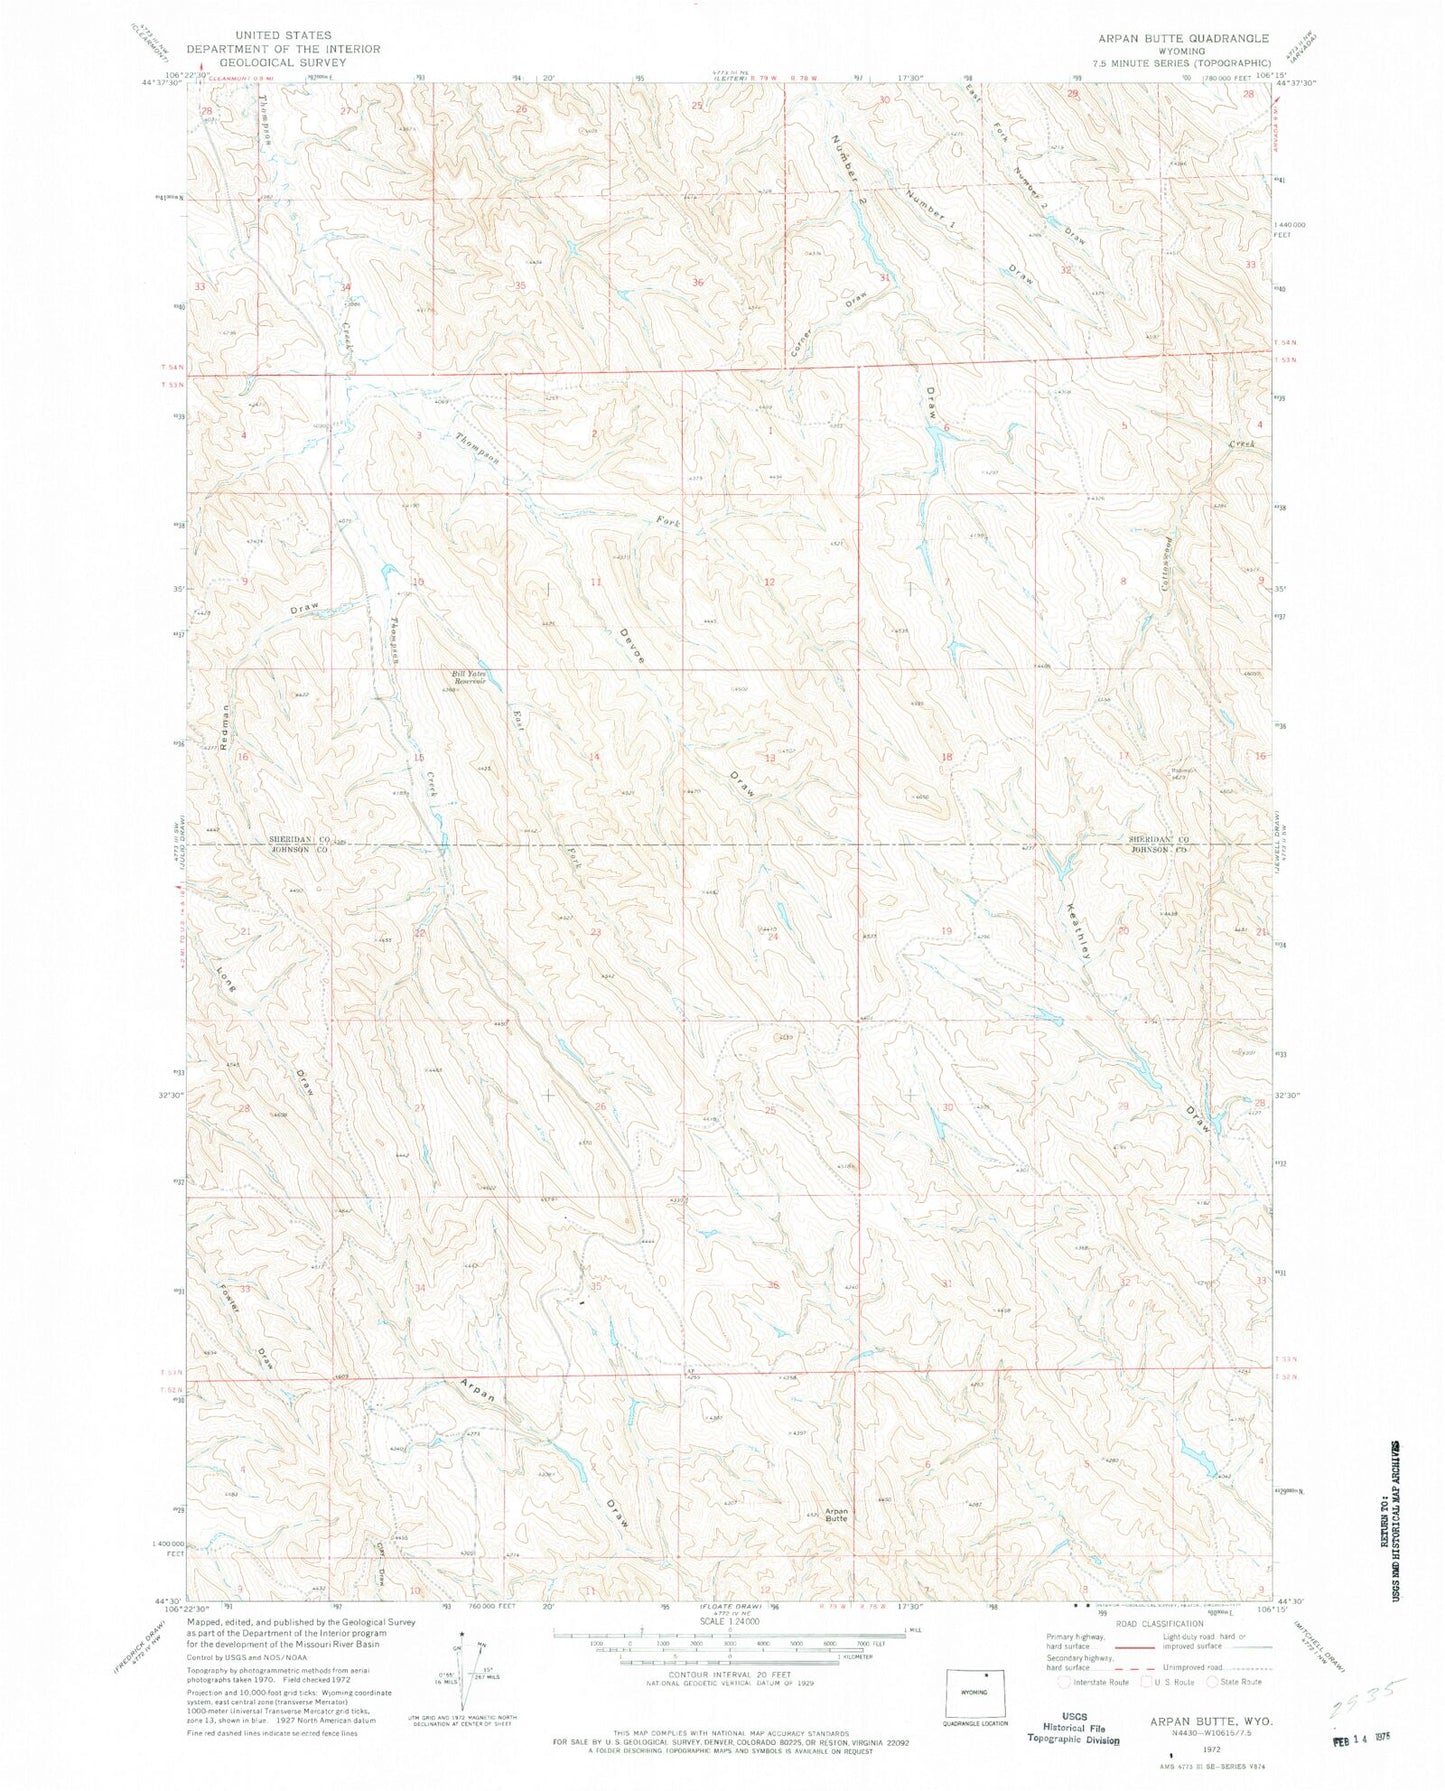 Classic USGS Arpan Butte Wyoming 7.5'x7.5' Topo Map Image